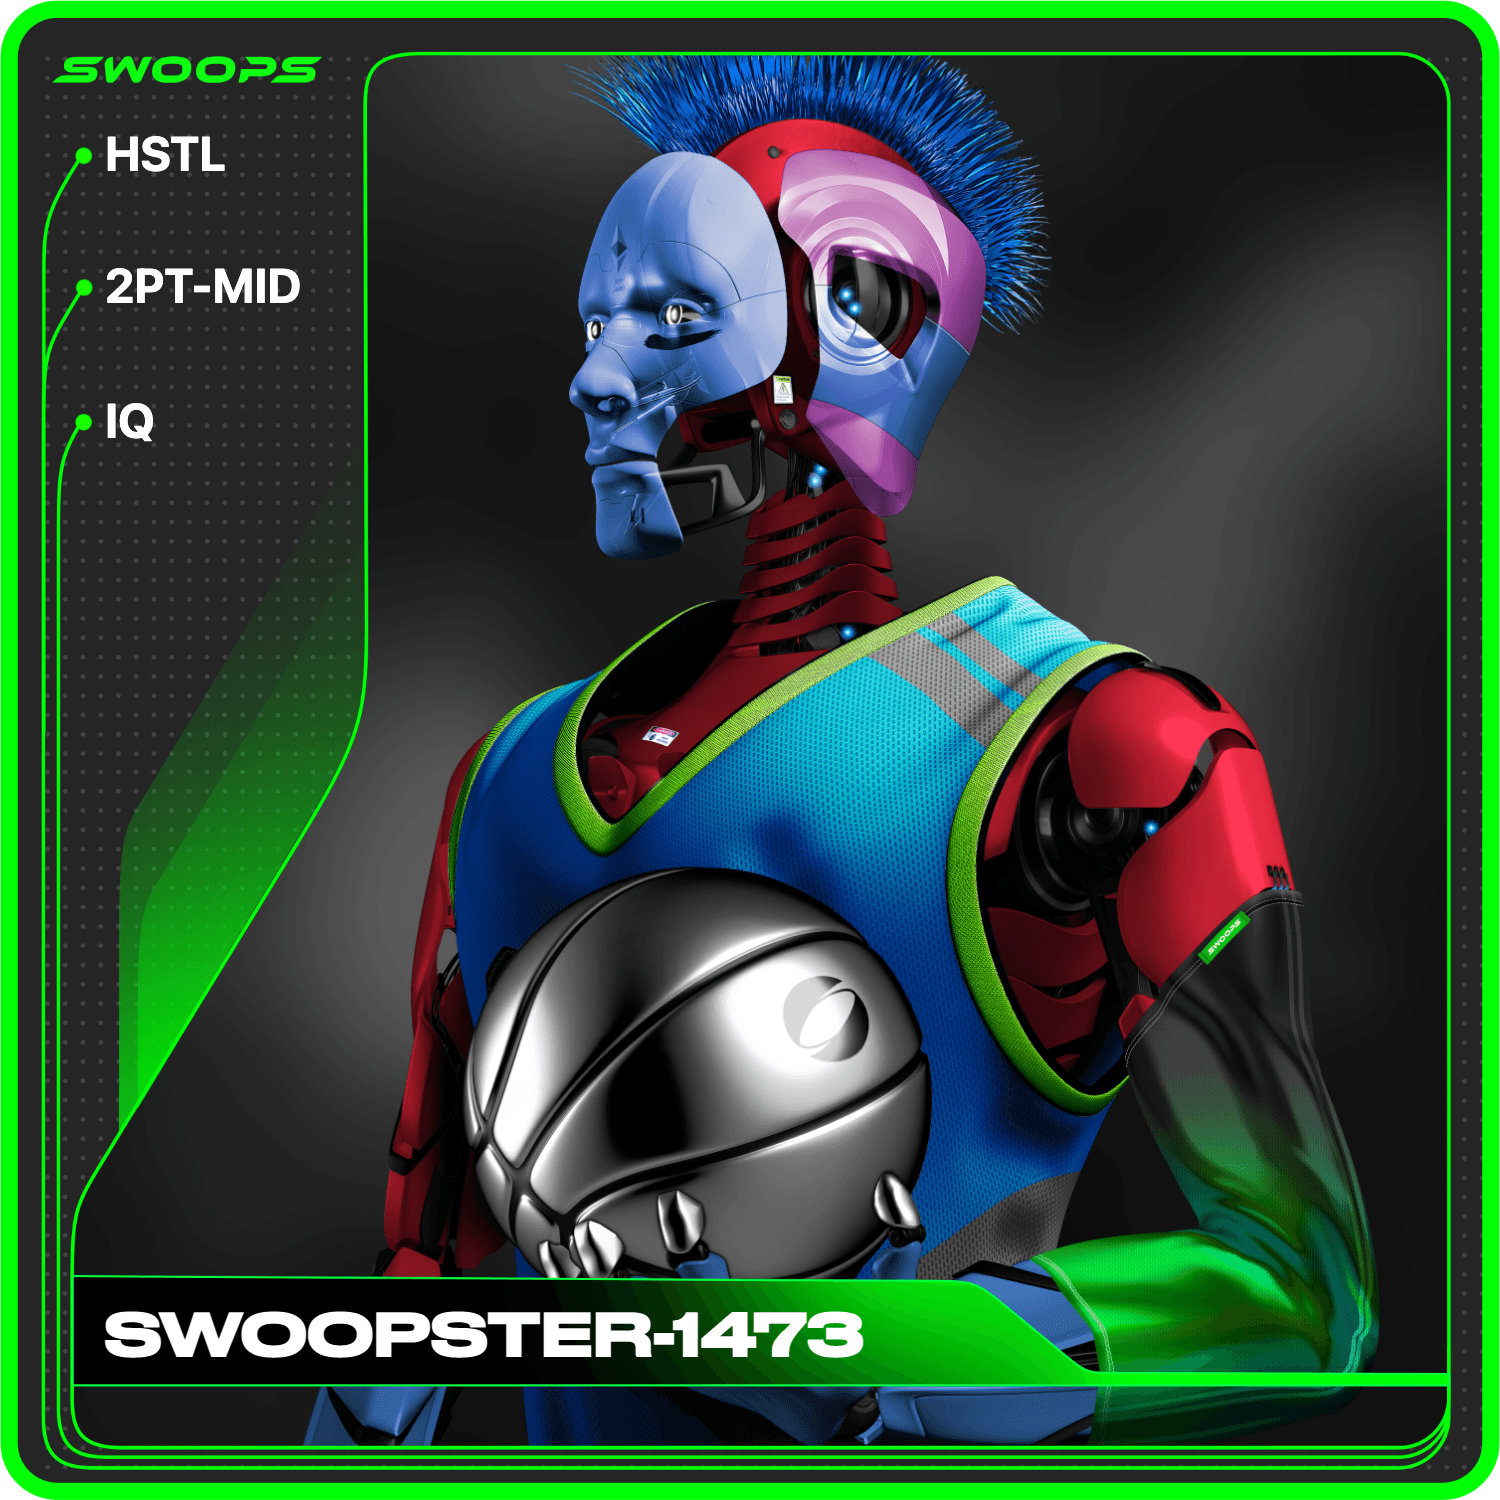 SWOOPSTER-1473